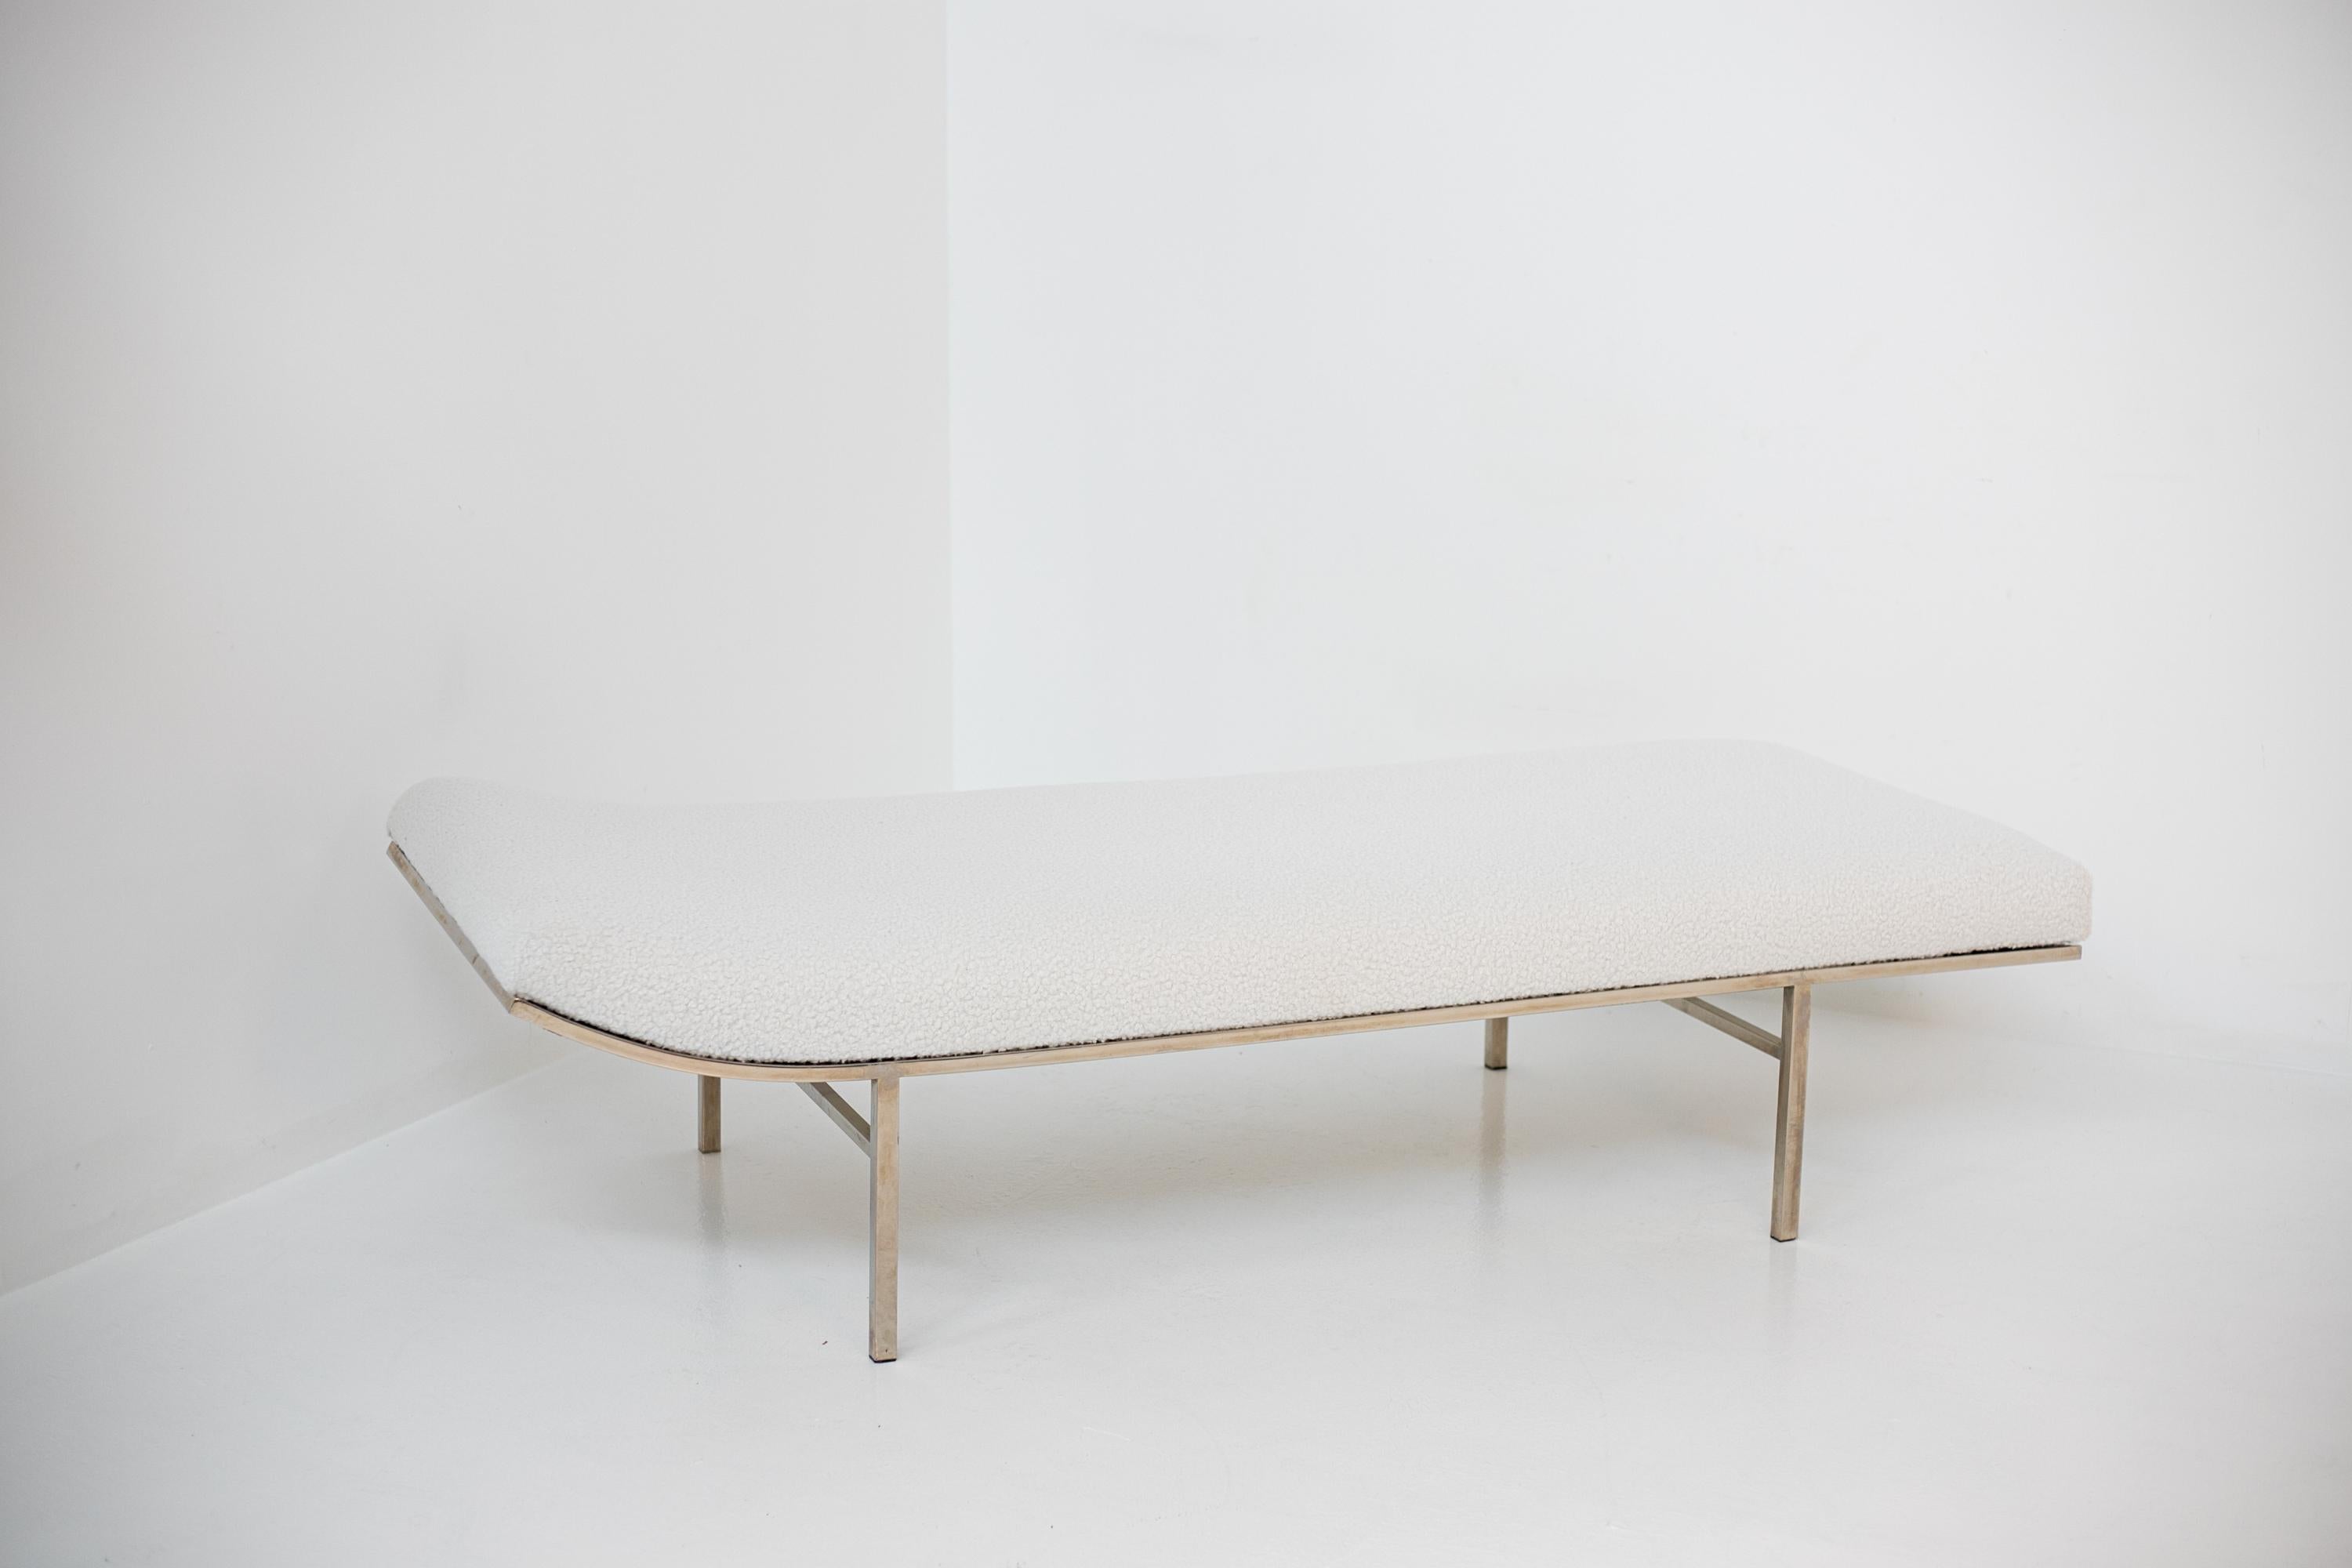 A sleek and extremely comfortable design, this chaise or daybed by Jules Heumann for Metropolitan has a long, low body padded with box tufting and a slightly raised end supported by a chrome-plated steel frame. The daybed is ideal for elegant or